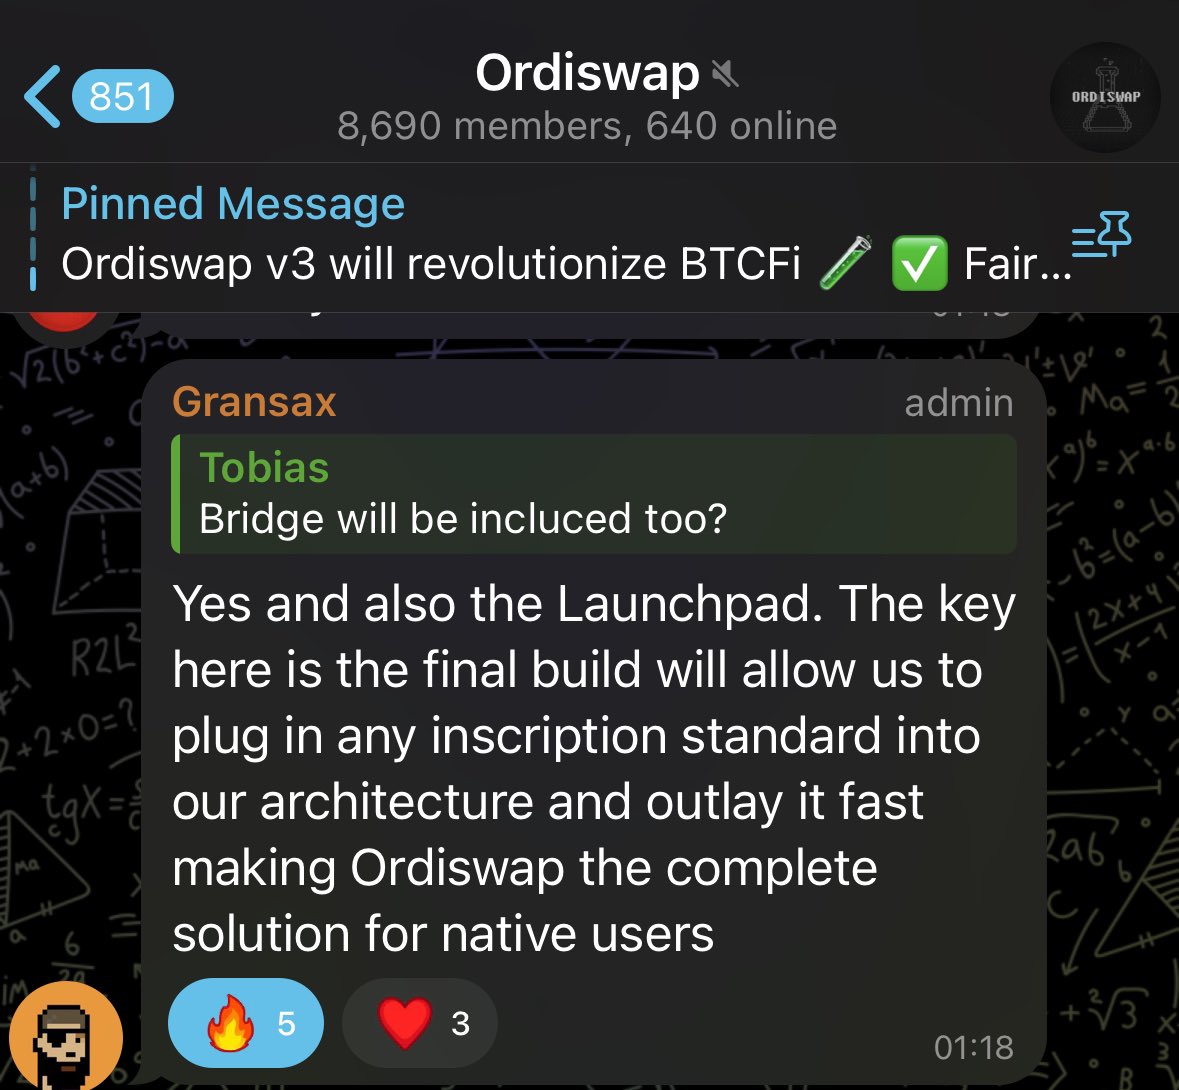 It’s just a matter of time for $ORDS to take the main stage. Invest in teams that are building. Time is ticking. Iykyk 💎 #BTCFi